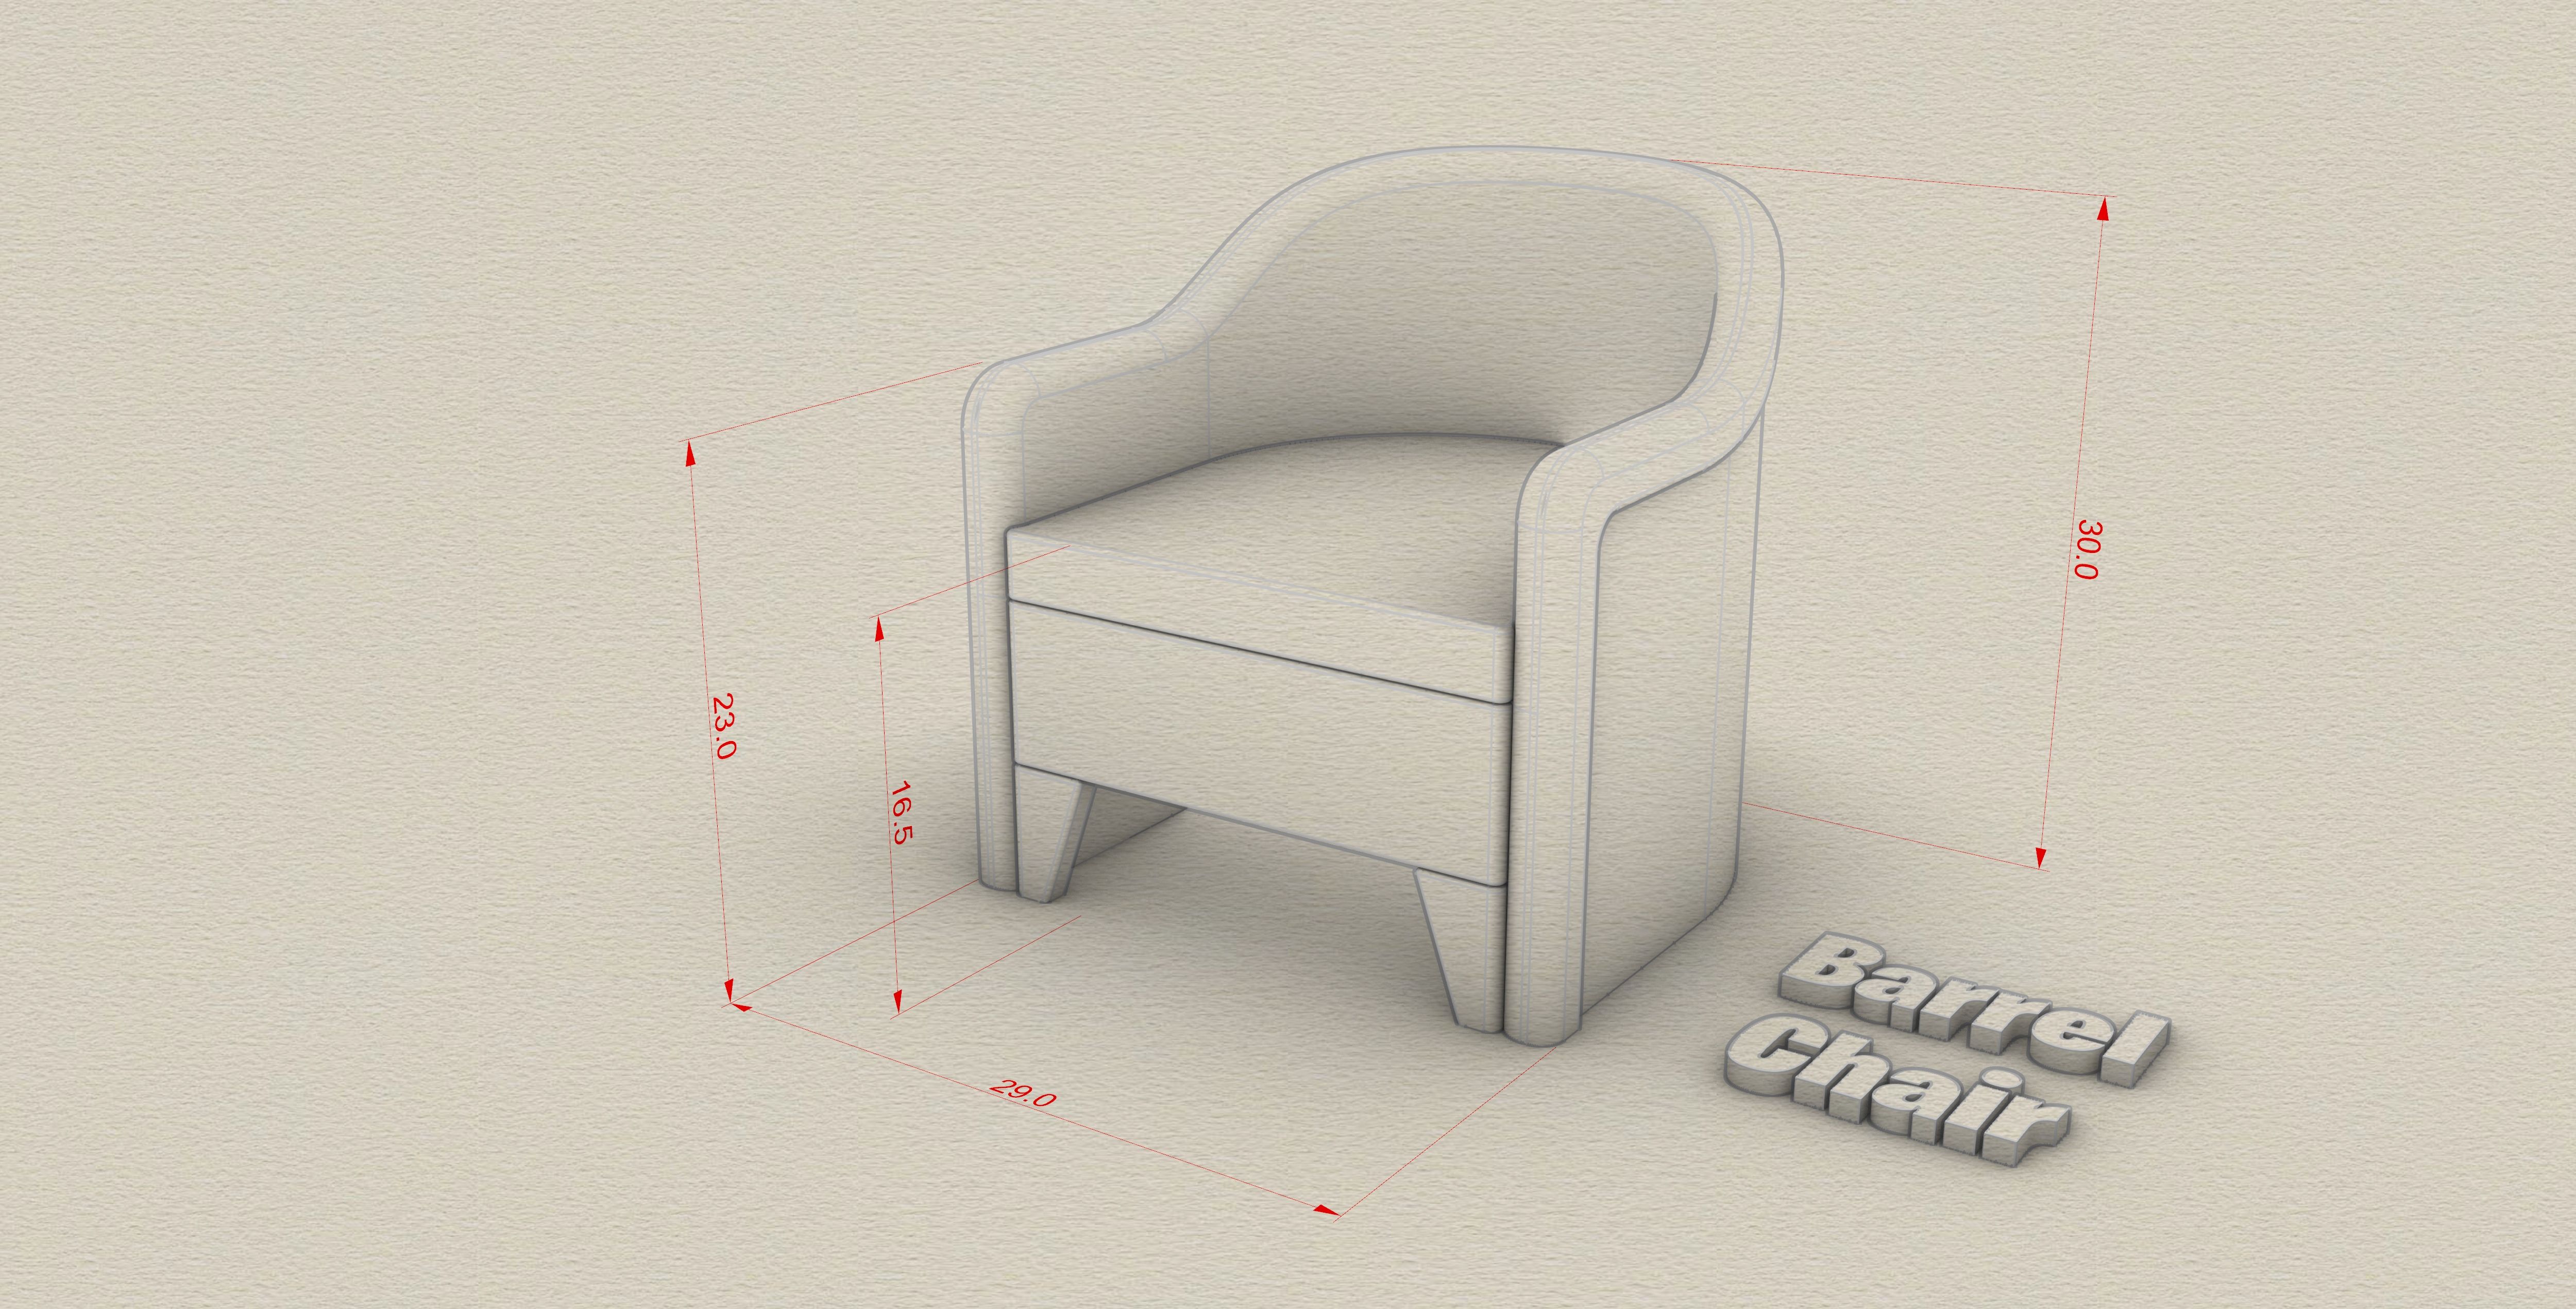 3d model of nightclub barrel chair with measurements